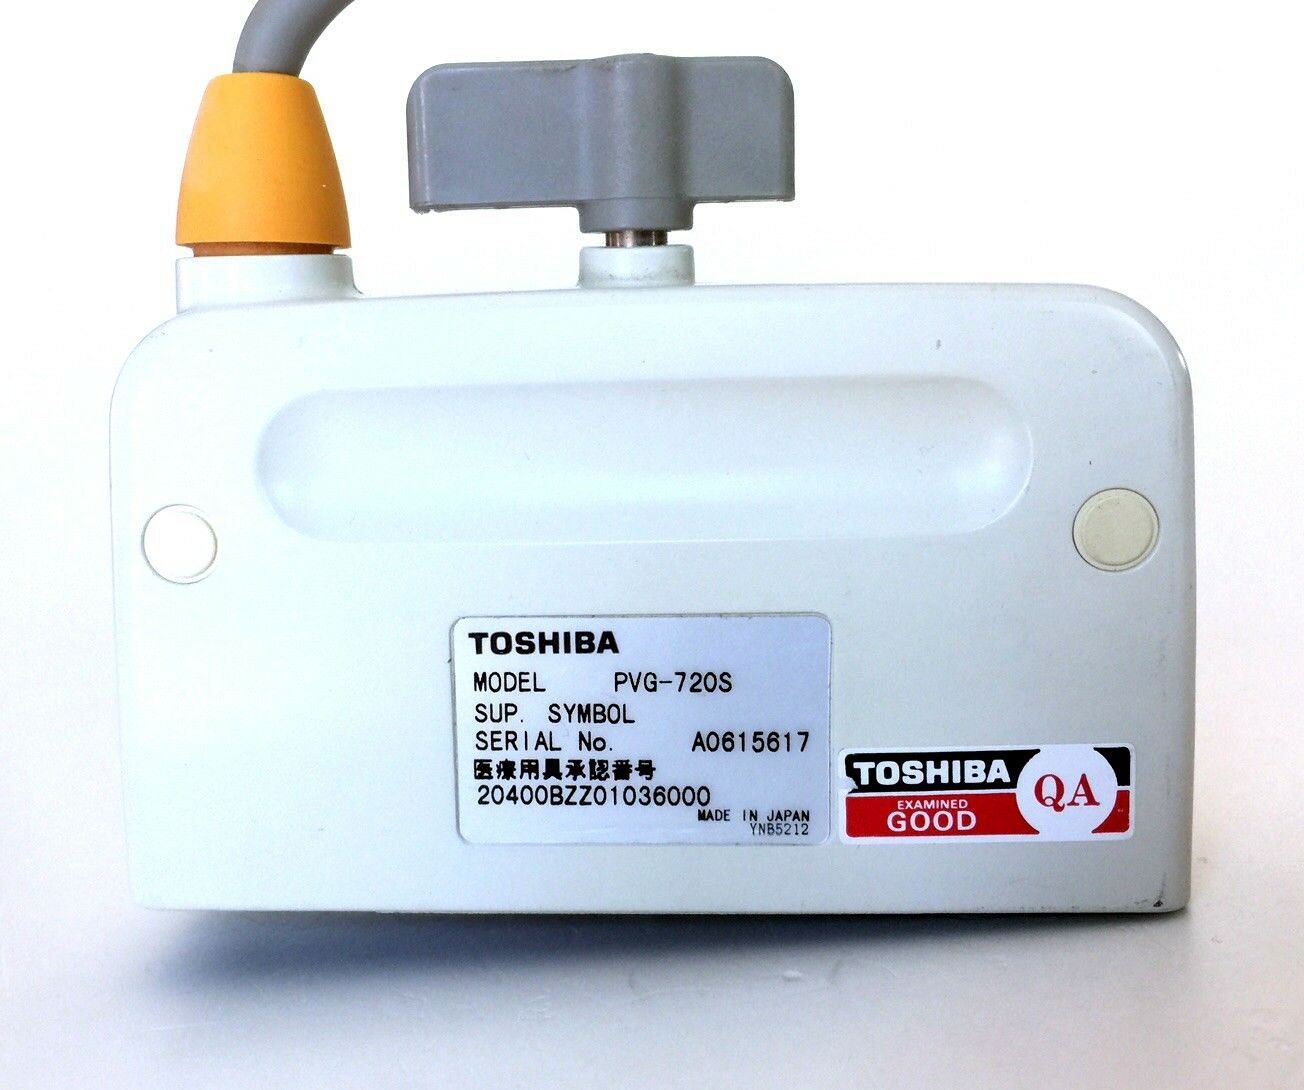 Toshiba PVG-720S Ultrasound Linear Probe USED DIAGNOSTIC ULTRASOUND MACHINES FOR SALE